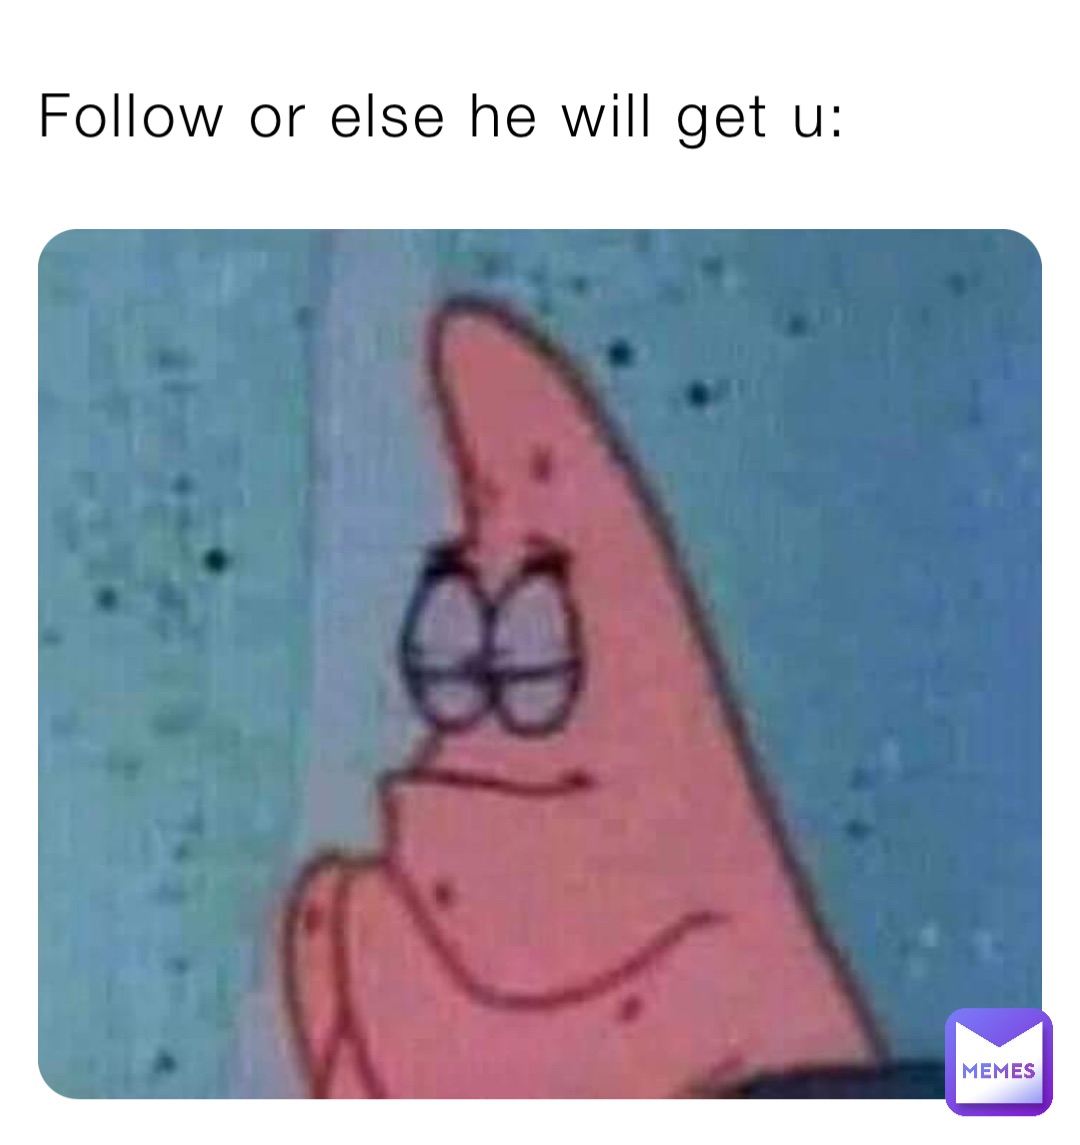 Follow or else he will get u: